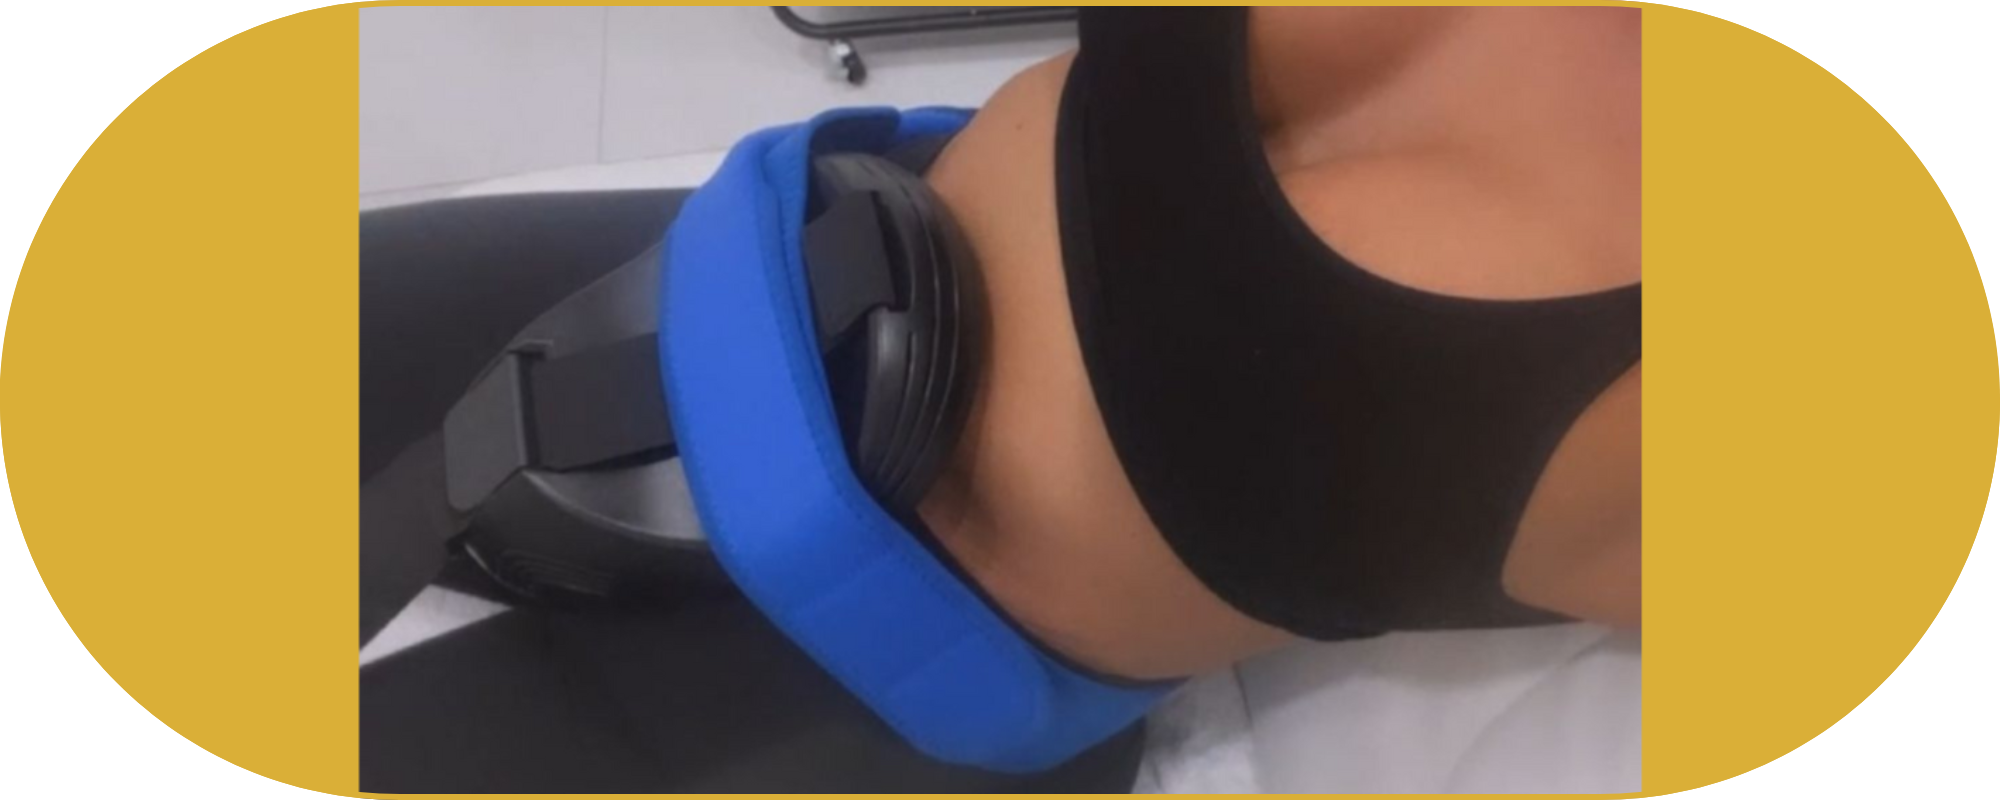 Electro Muscle stimulation used on female stomach area for toning and weightloss